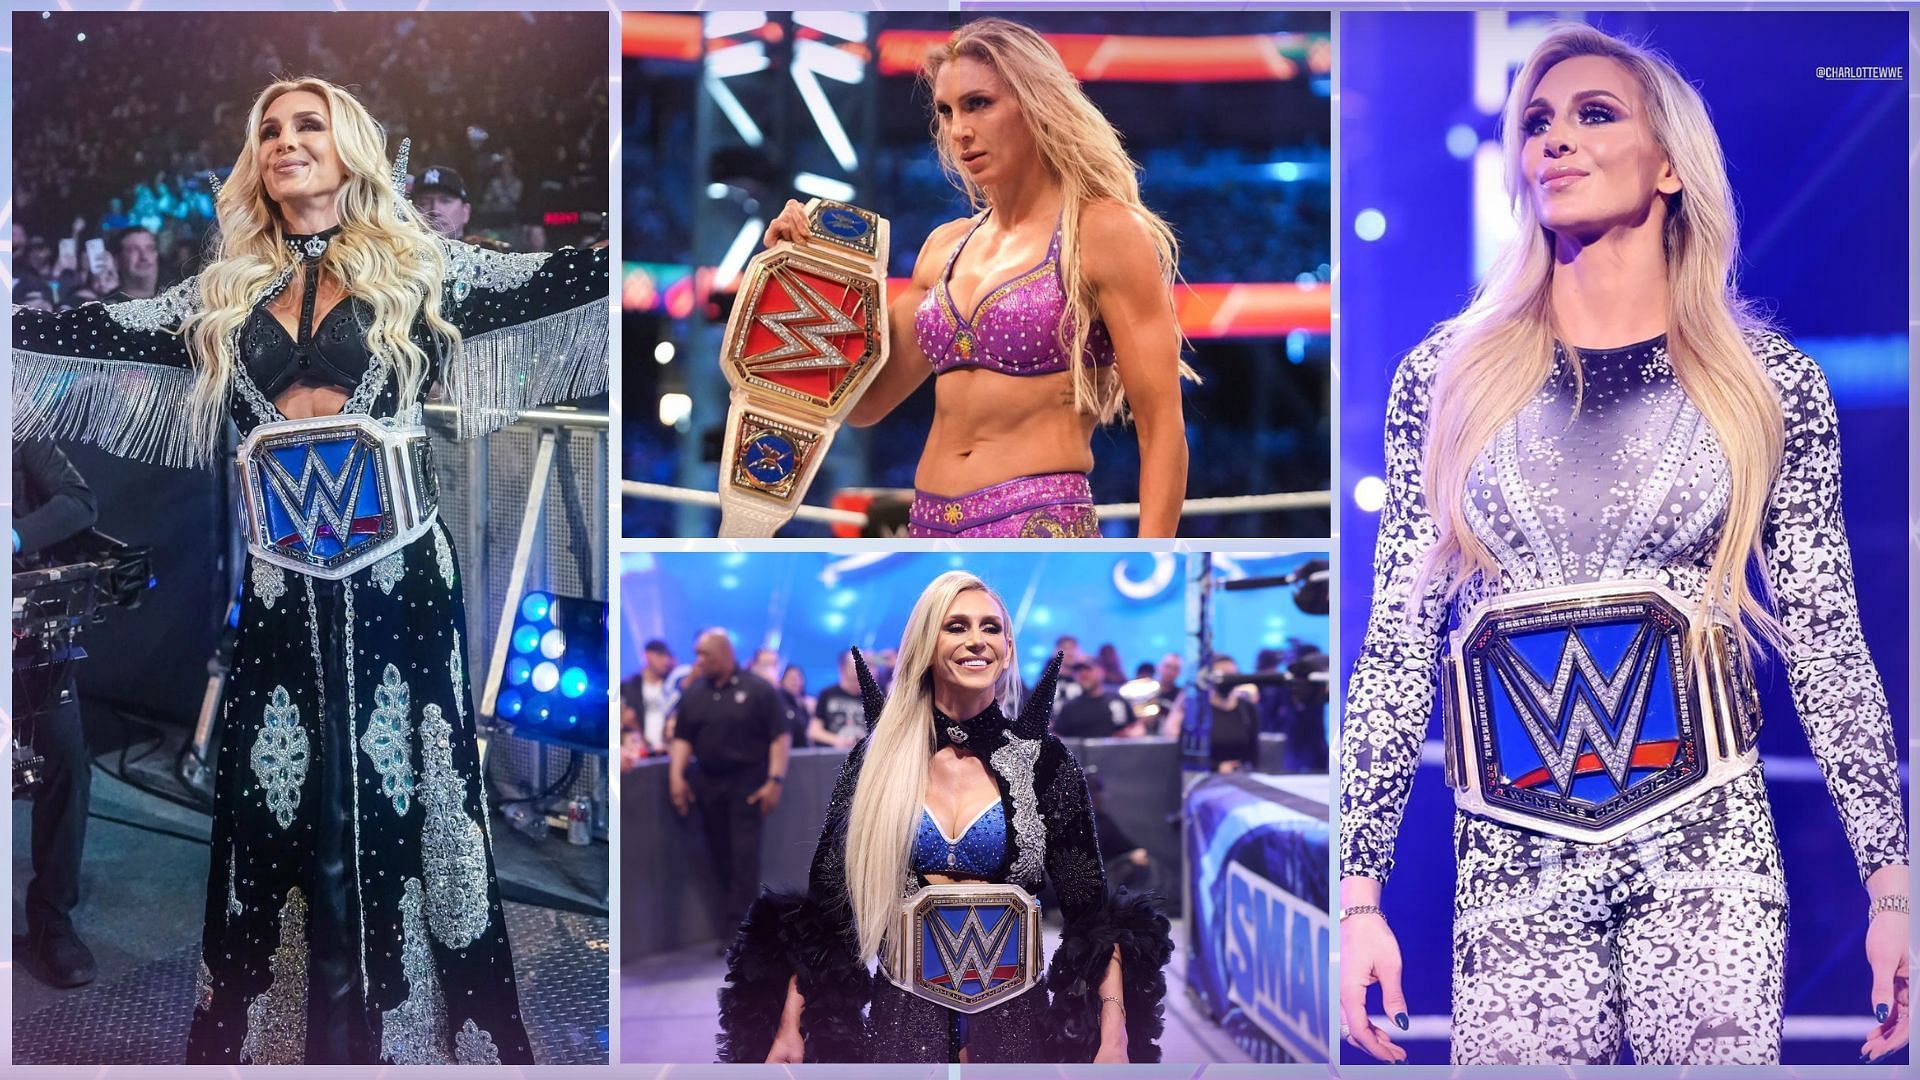 WWE Superstar Charlotte Flair has not been seen in the ring for quite a while now.